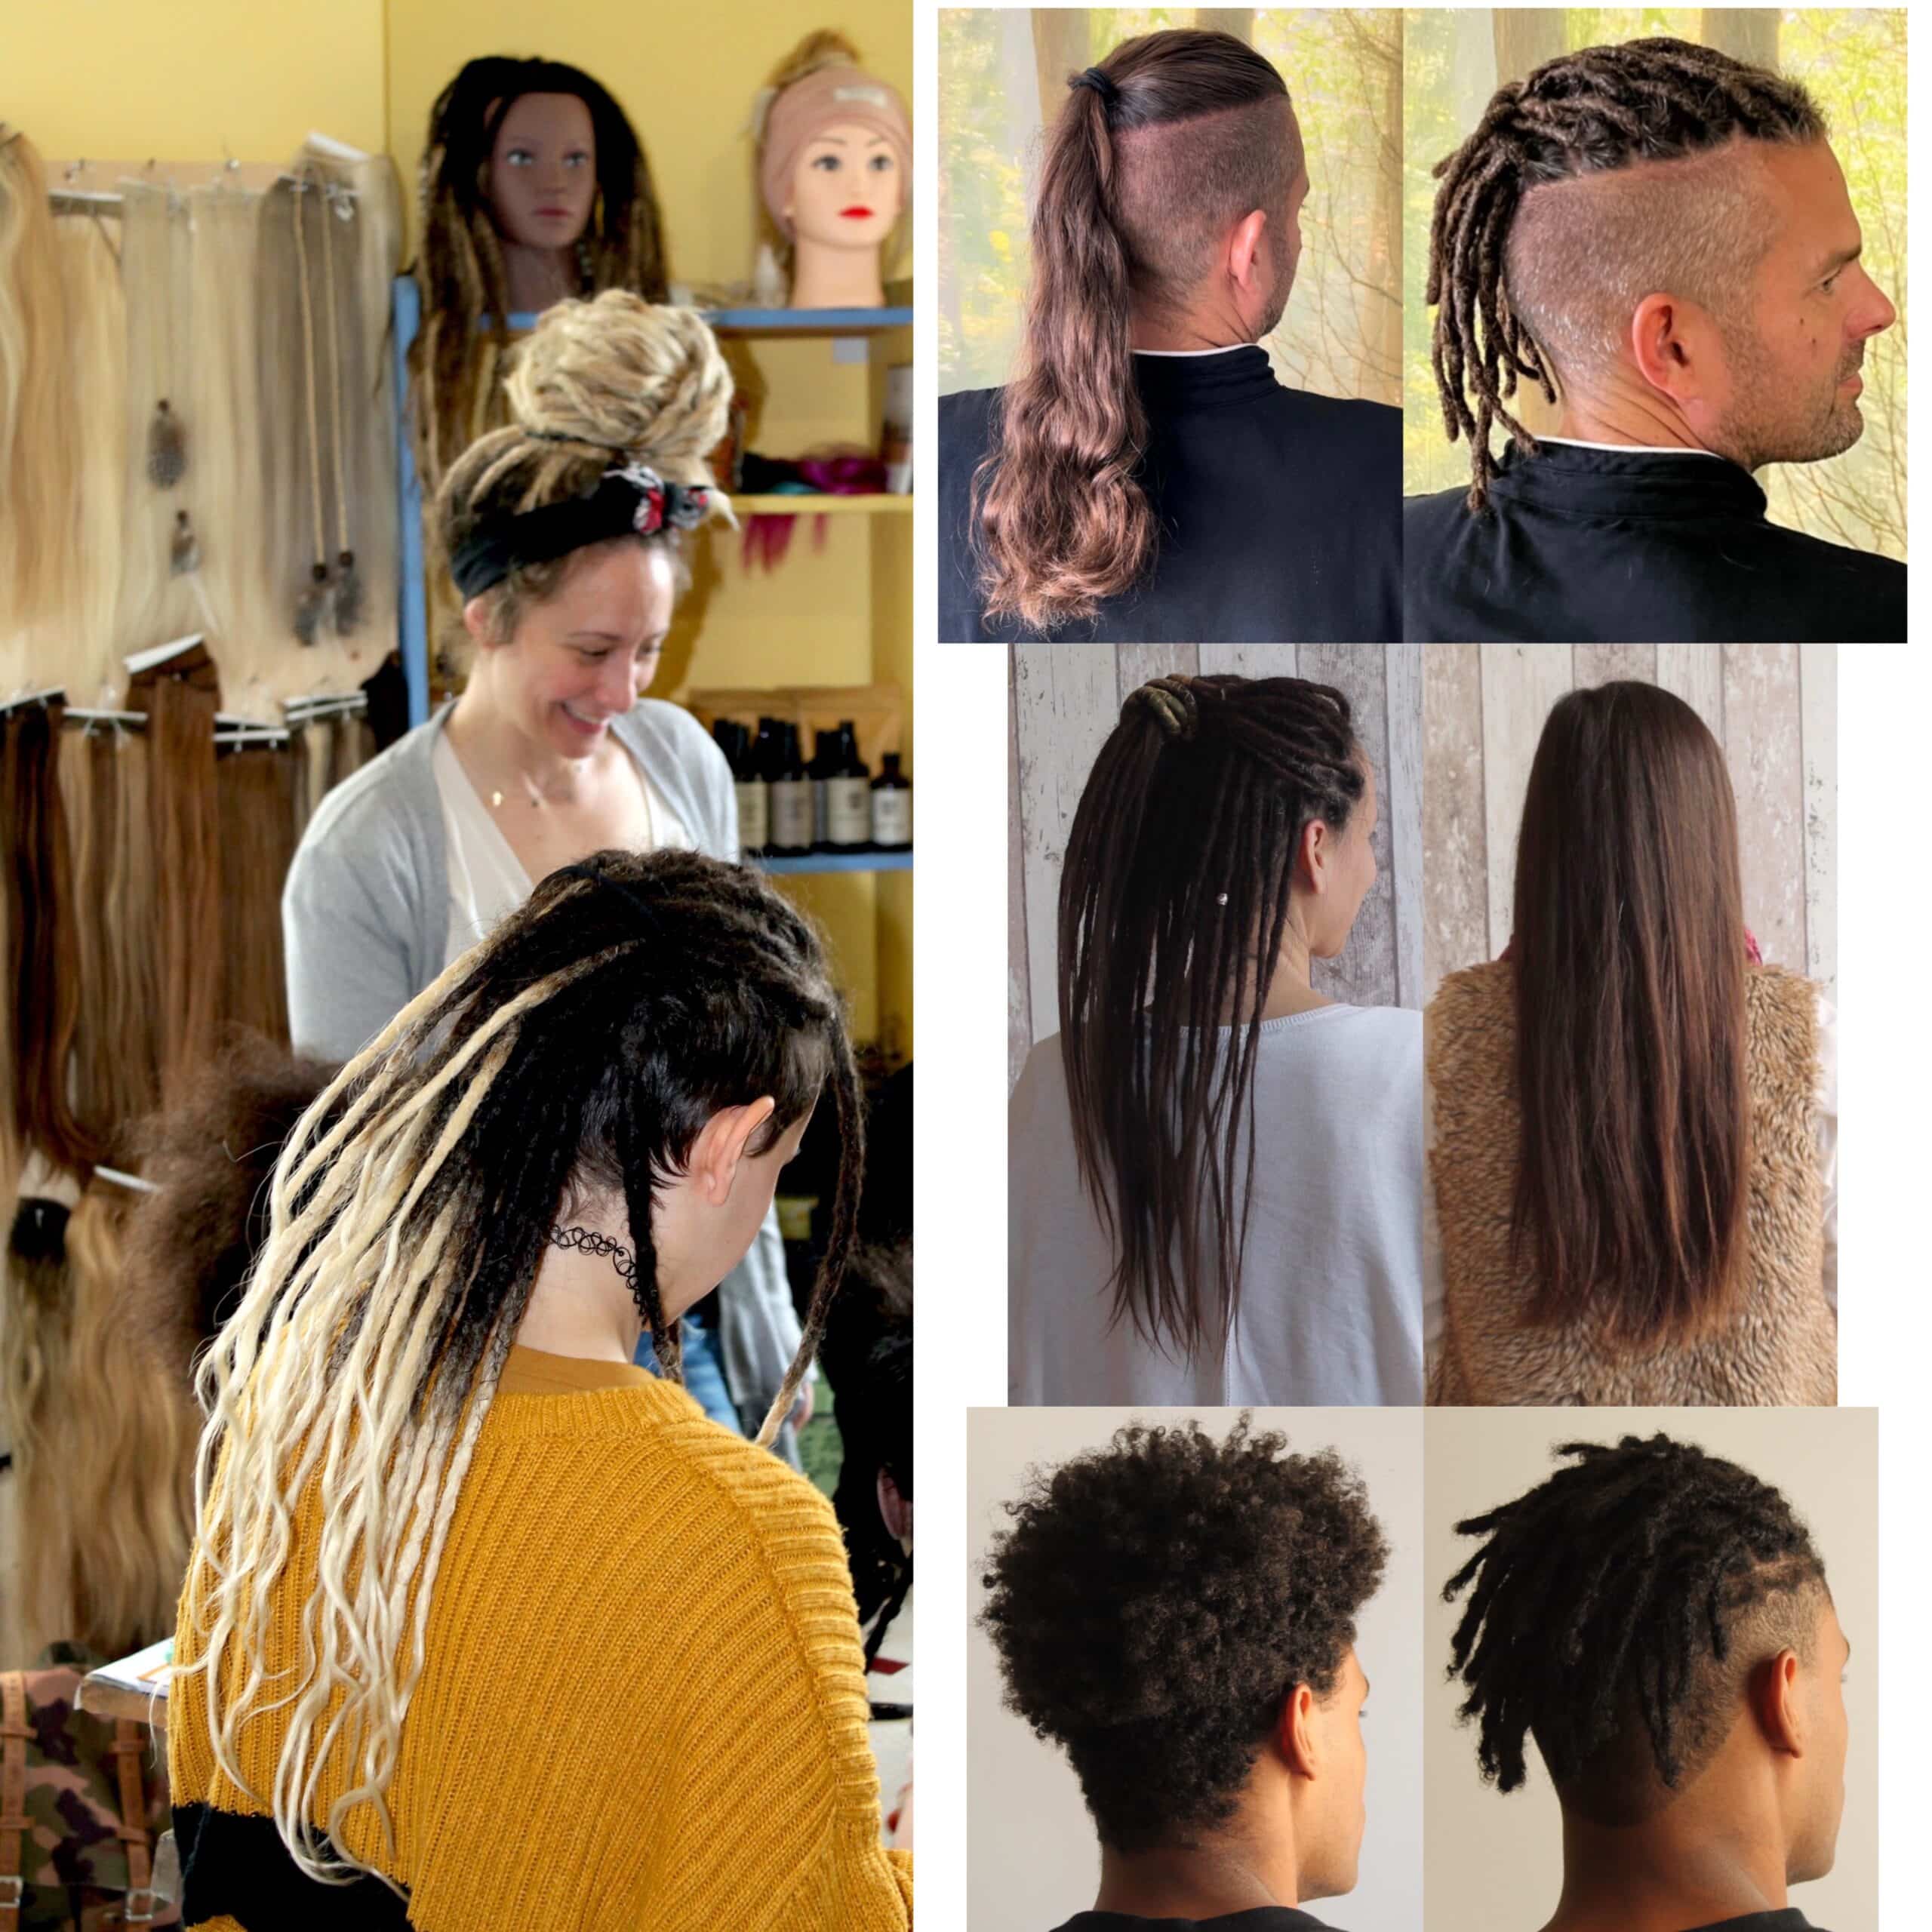 How to learn to make beautiful natural dreadlocks with crochet. Learn how to maintain crochet dreadlocks. Training for professional hairdressers.